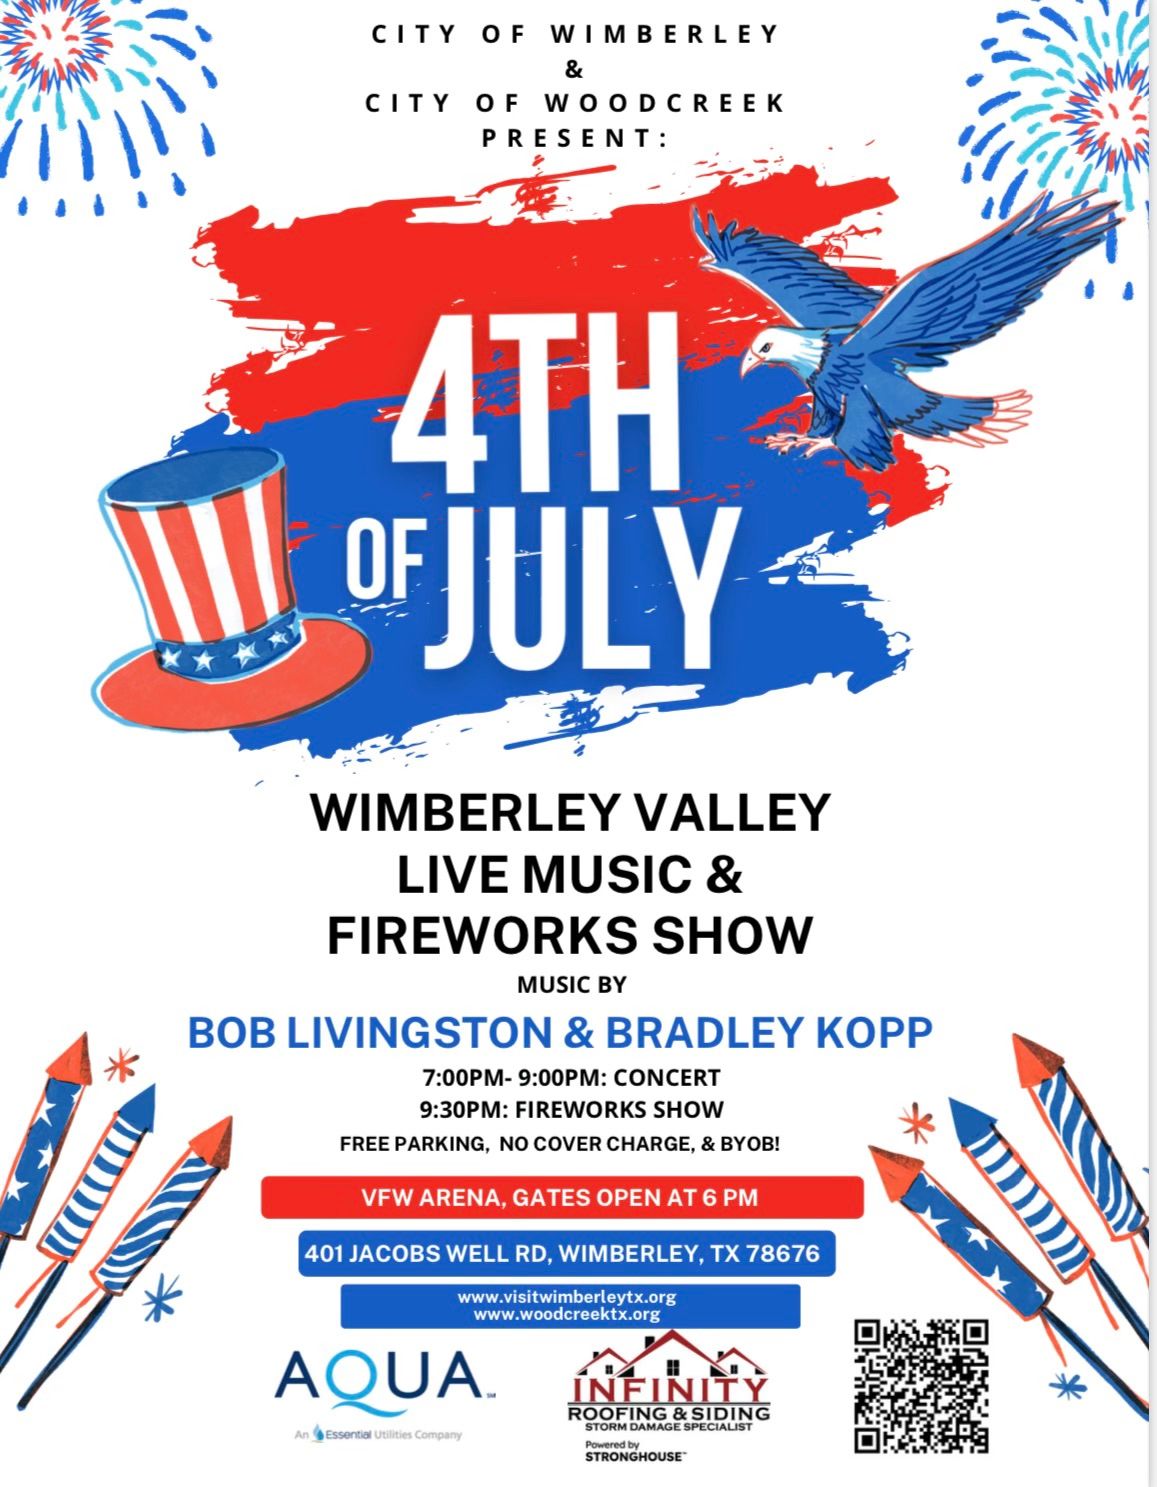 Wimberley Valley 4th of July show